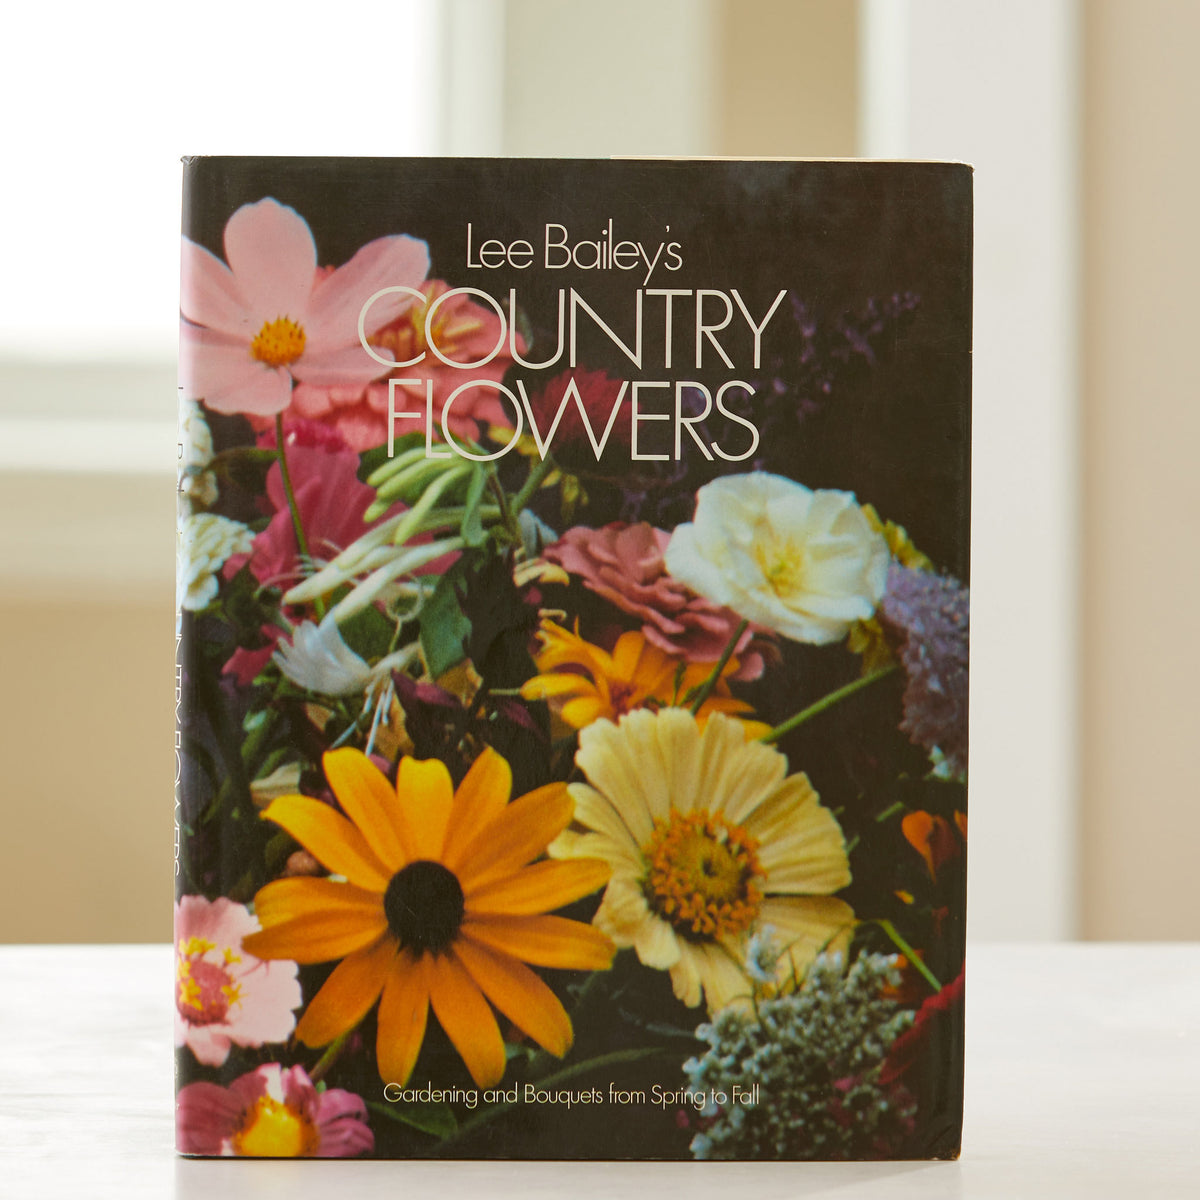 Lee Bailey’s County Flowers. Monthly gardening guide, April-Sept. Illustrates perennial plants &amp; how to make a garden bed. Best flower gardening book.